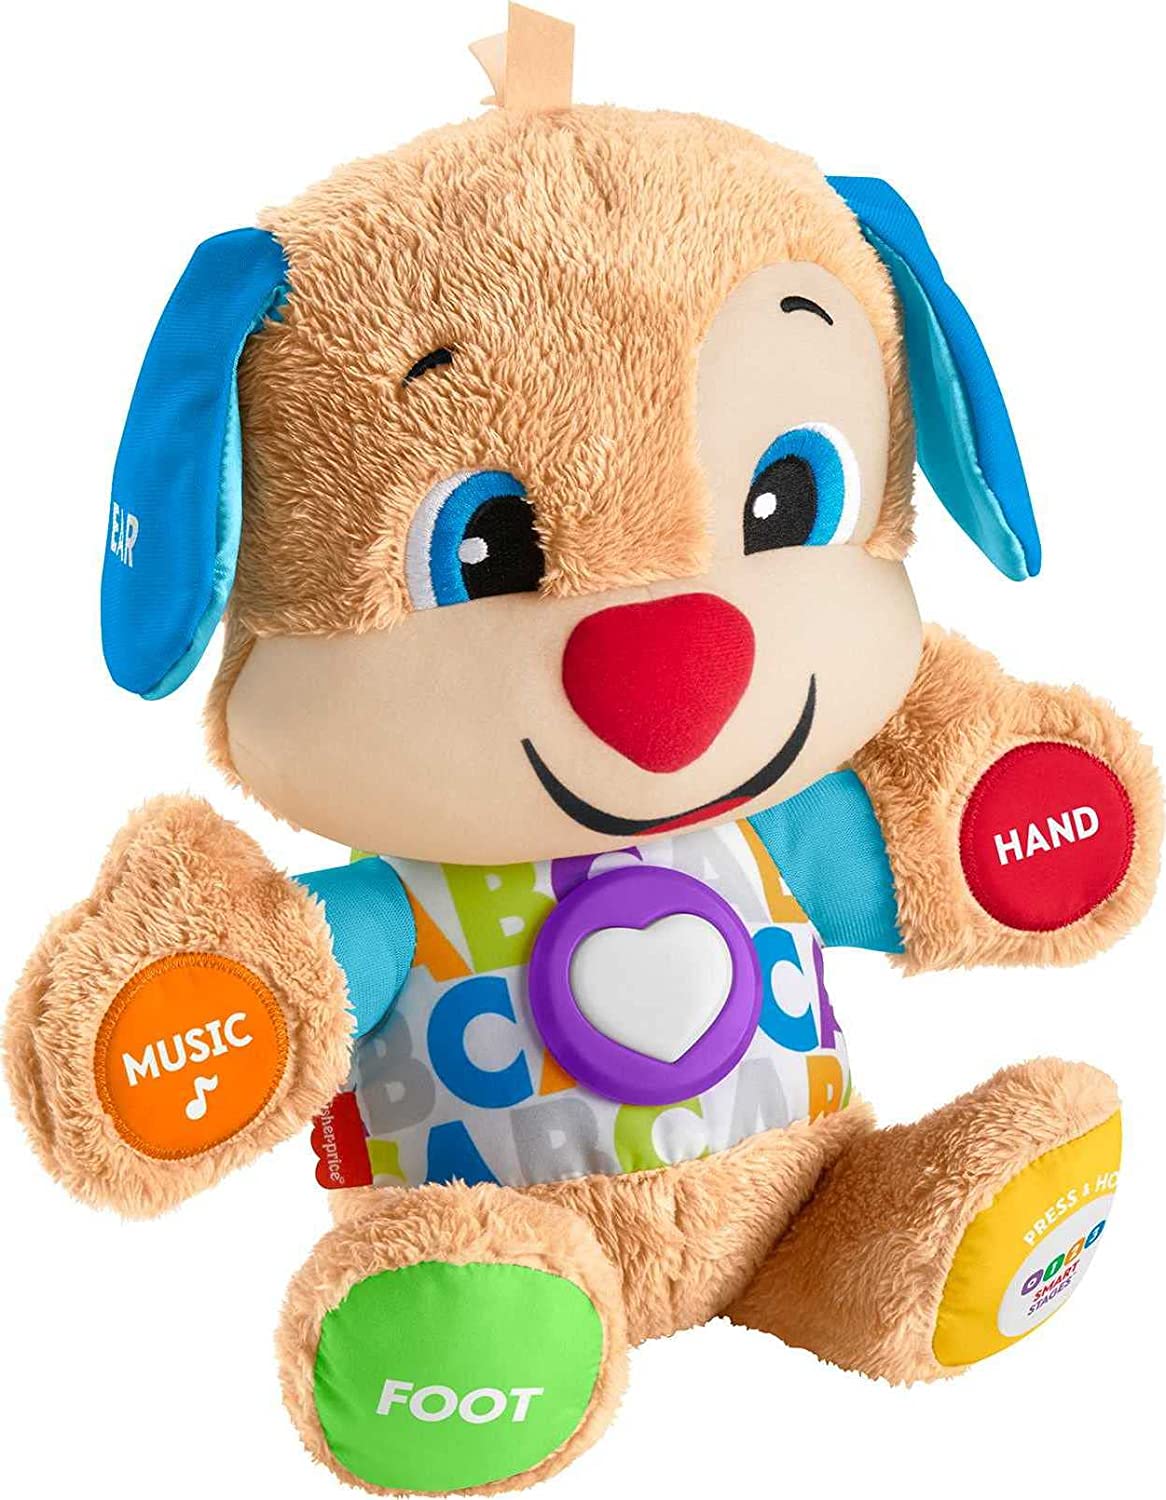 Fisher-Price Laugh & Learn Smart Stages Plush Toy (Brown Puppy) w/ 75 Sounds $7.25 + Free Ship w/Prime